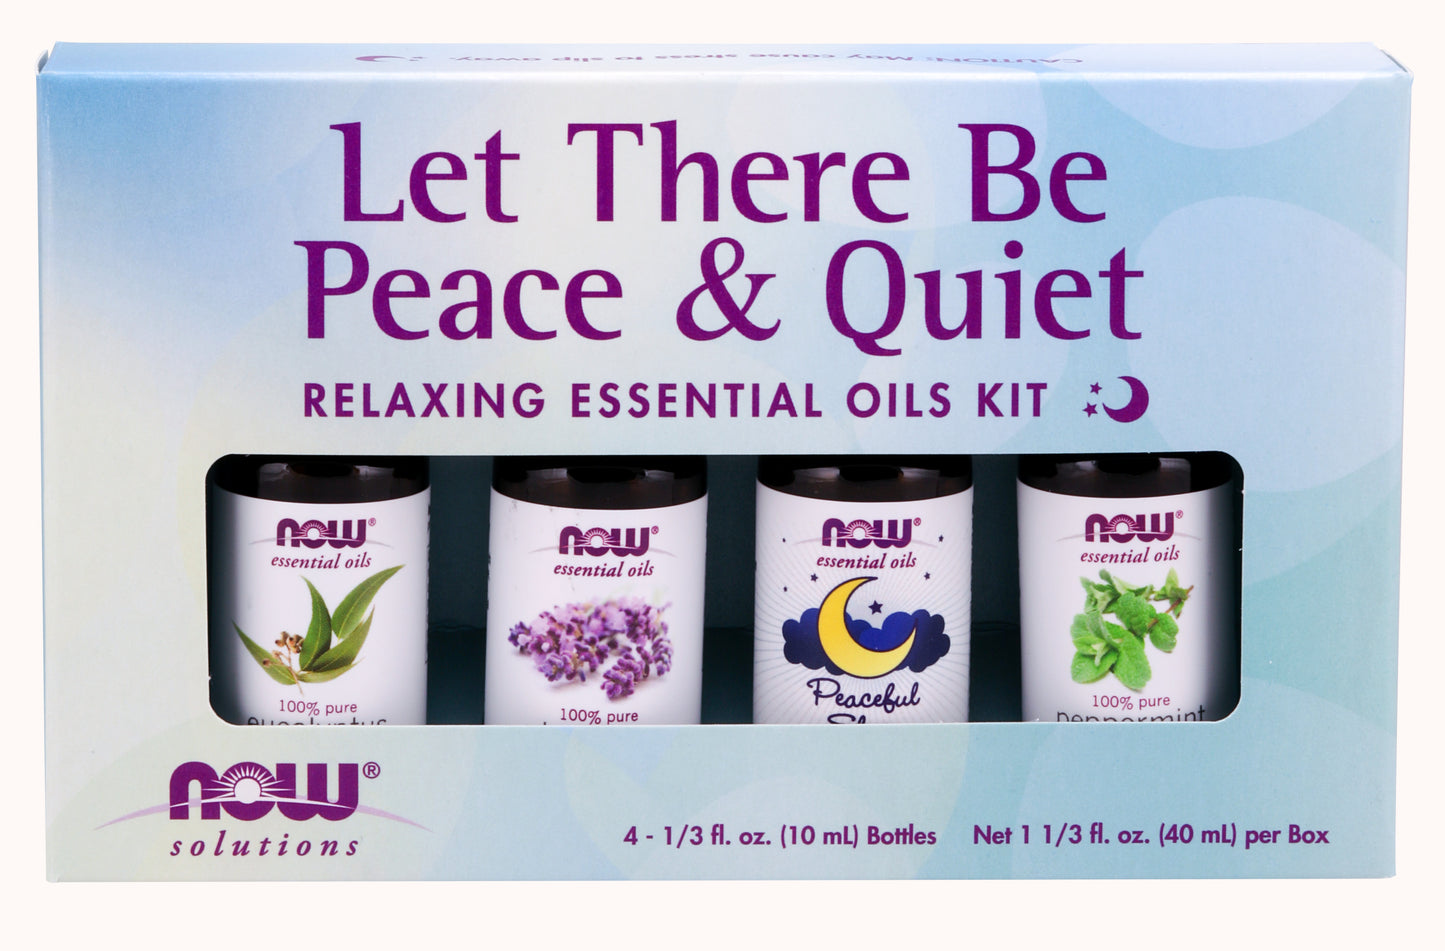 Let There Be Peace & Quiet Essential Oils Kit